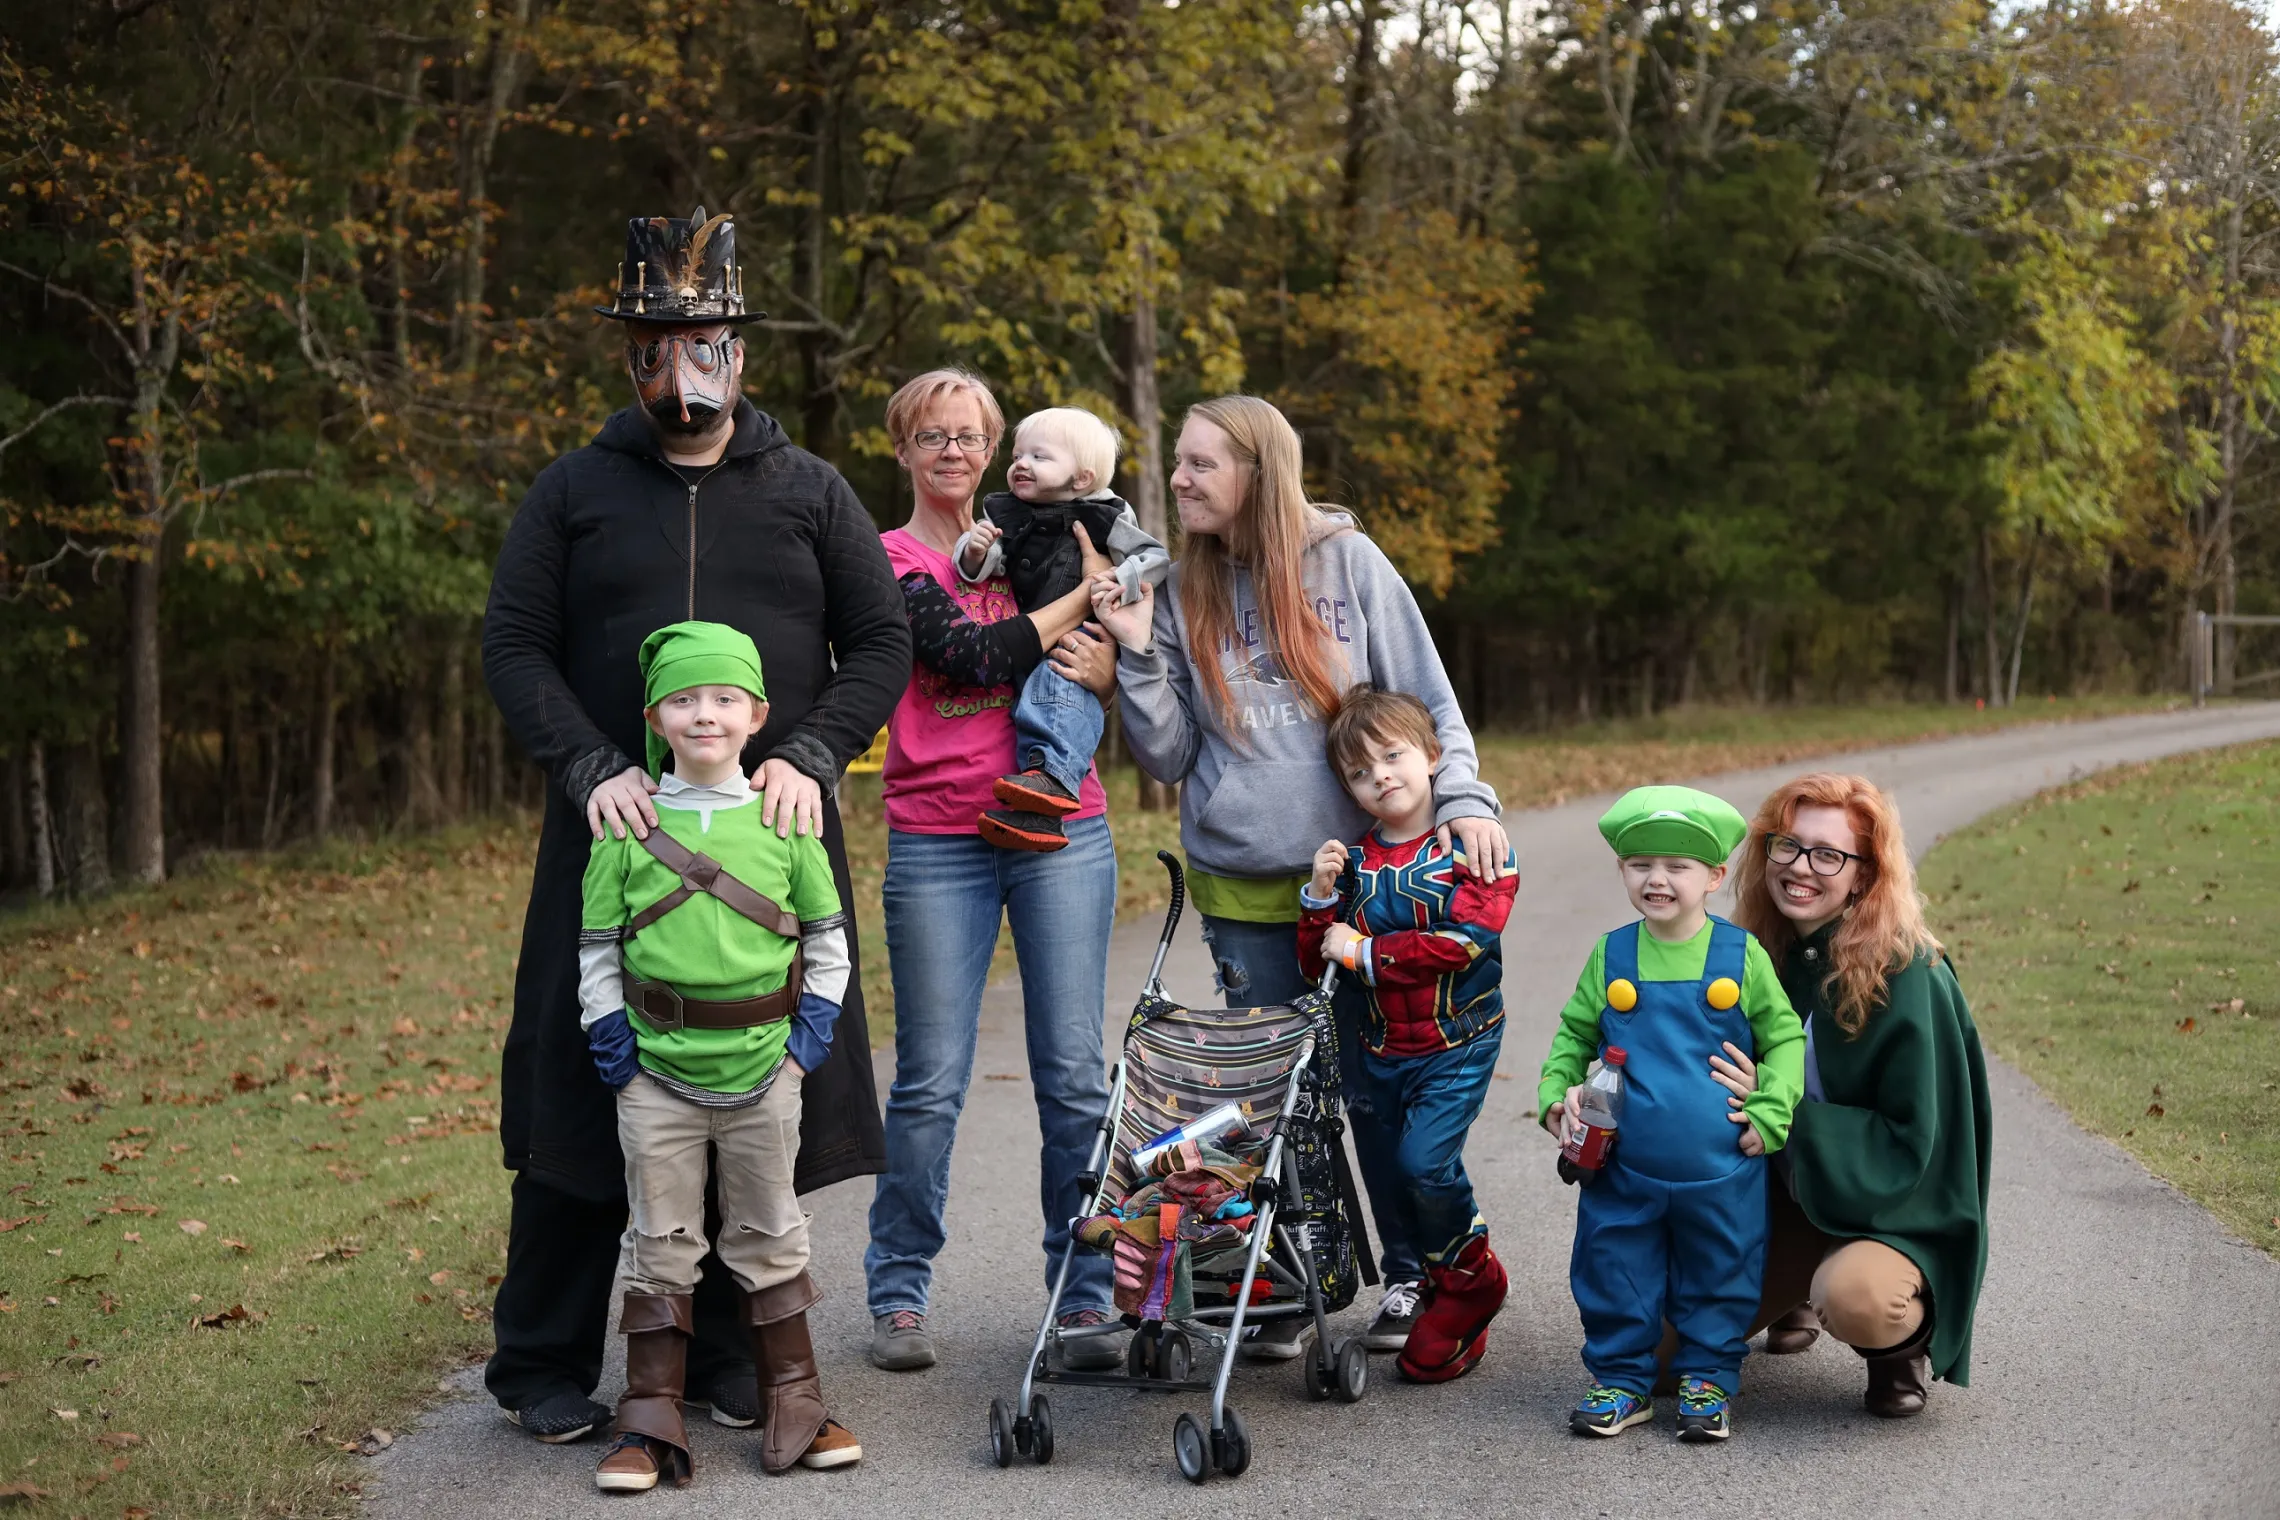 Family in Halloween costumes